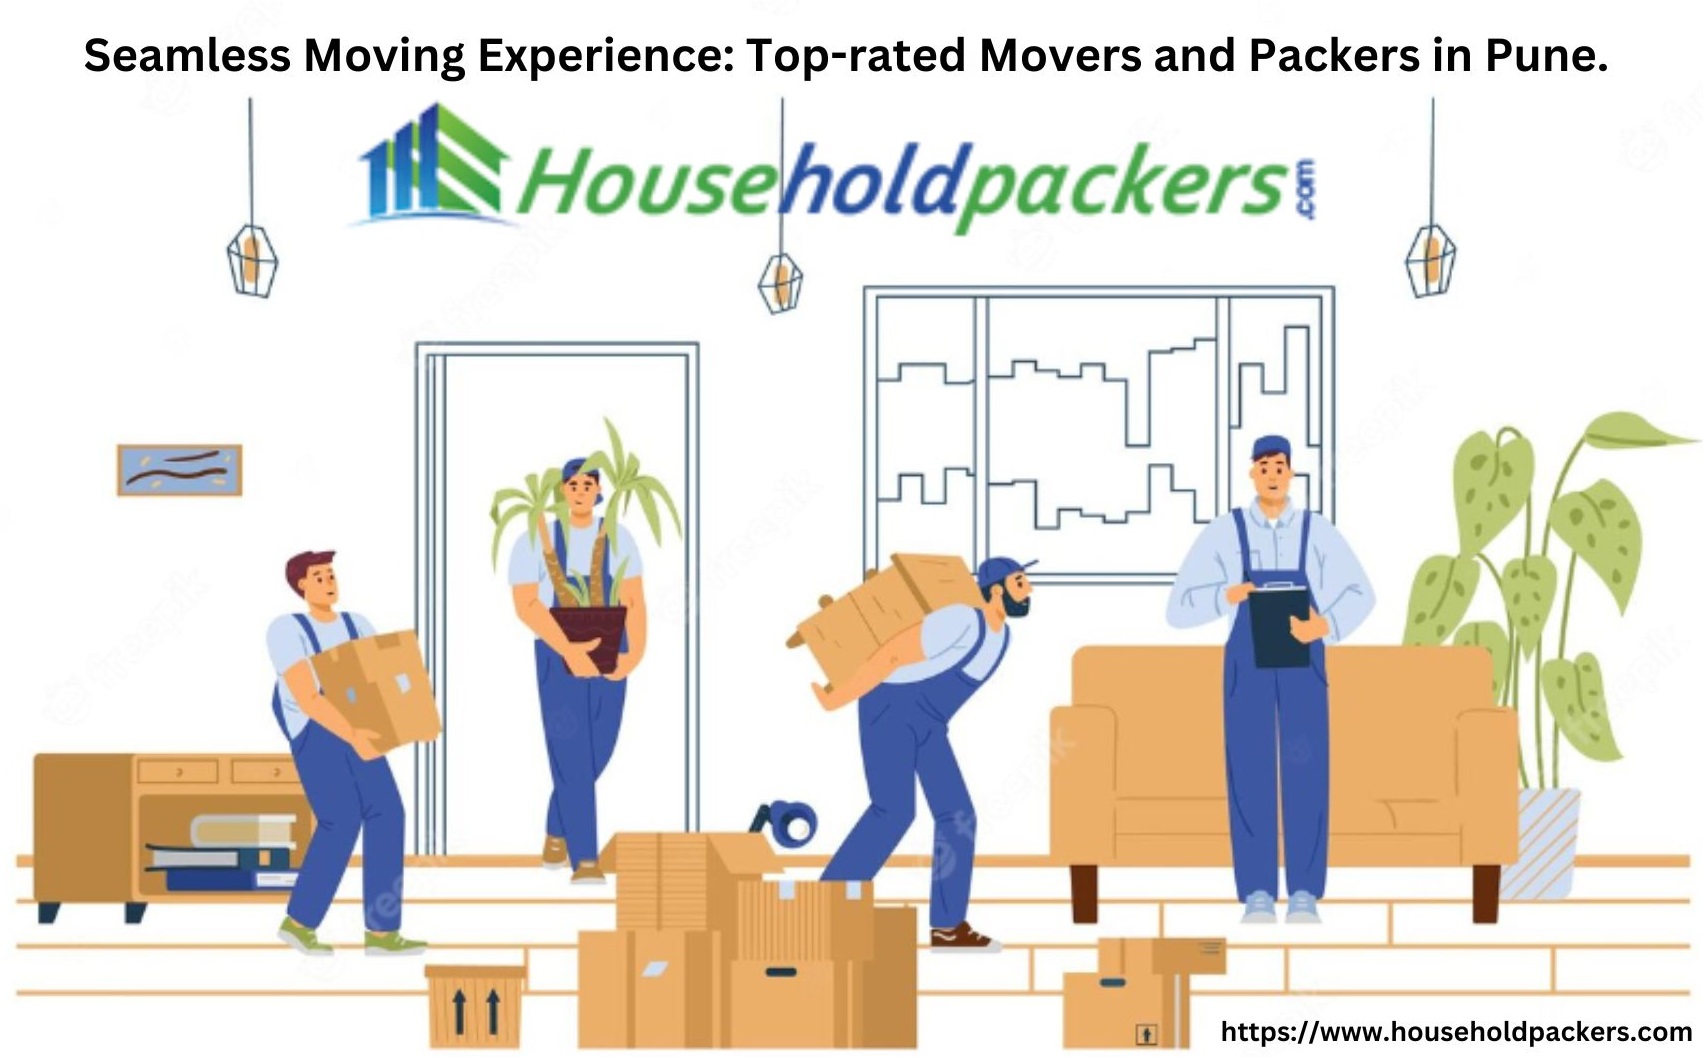 Seamless Moving Experience: Top-rated Movers and Packers in Pune